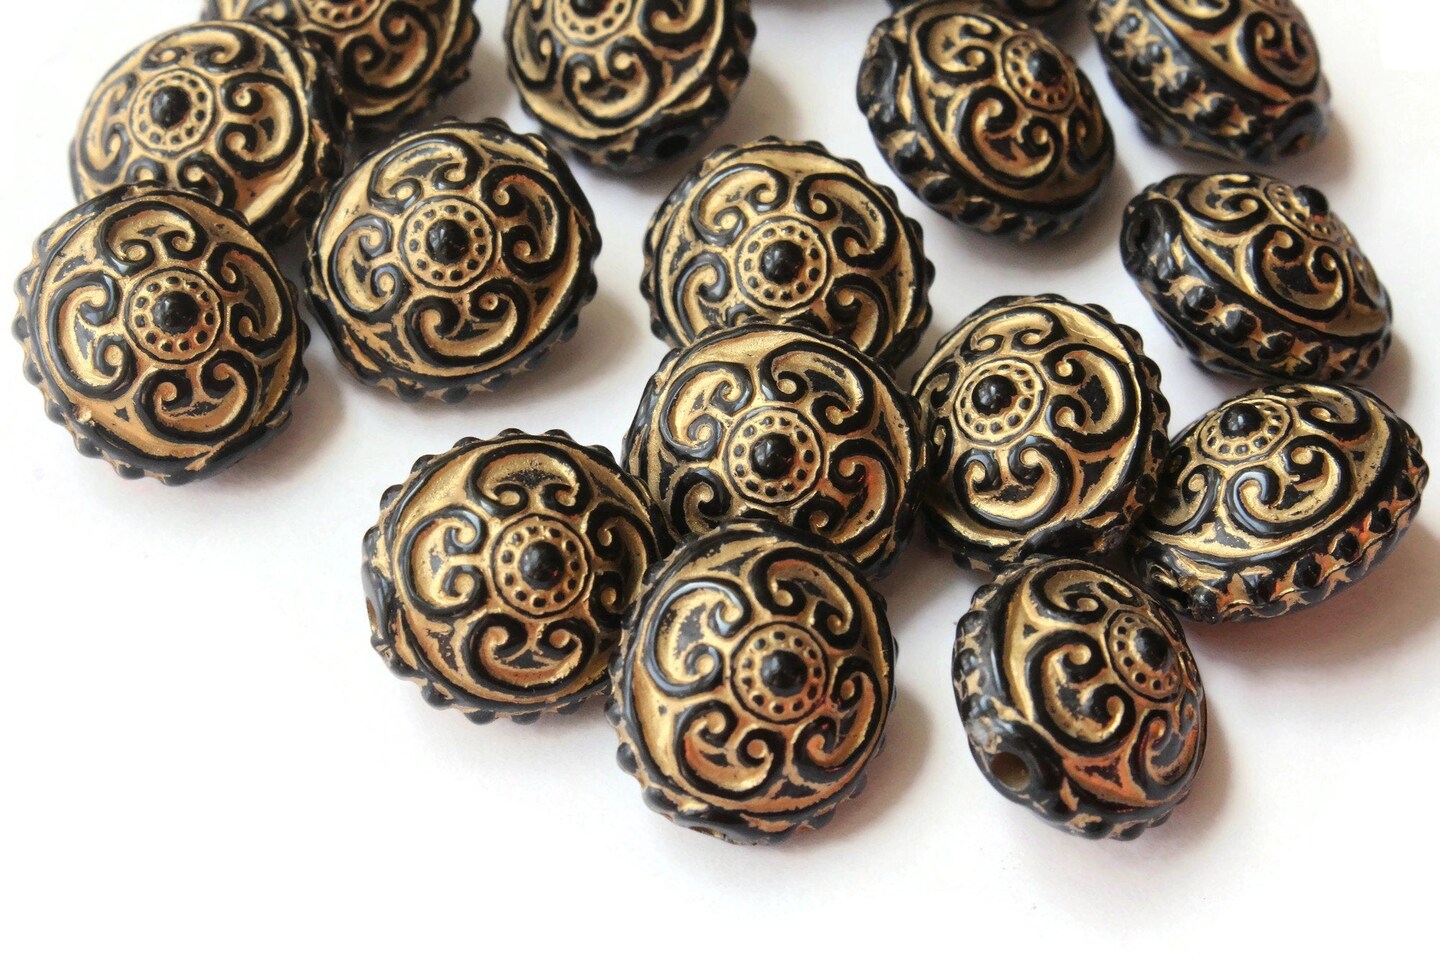 20 15mm Black Plastic Oval Beads with Gold Trim